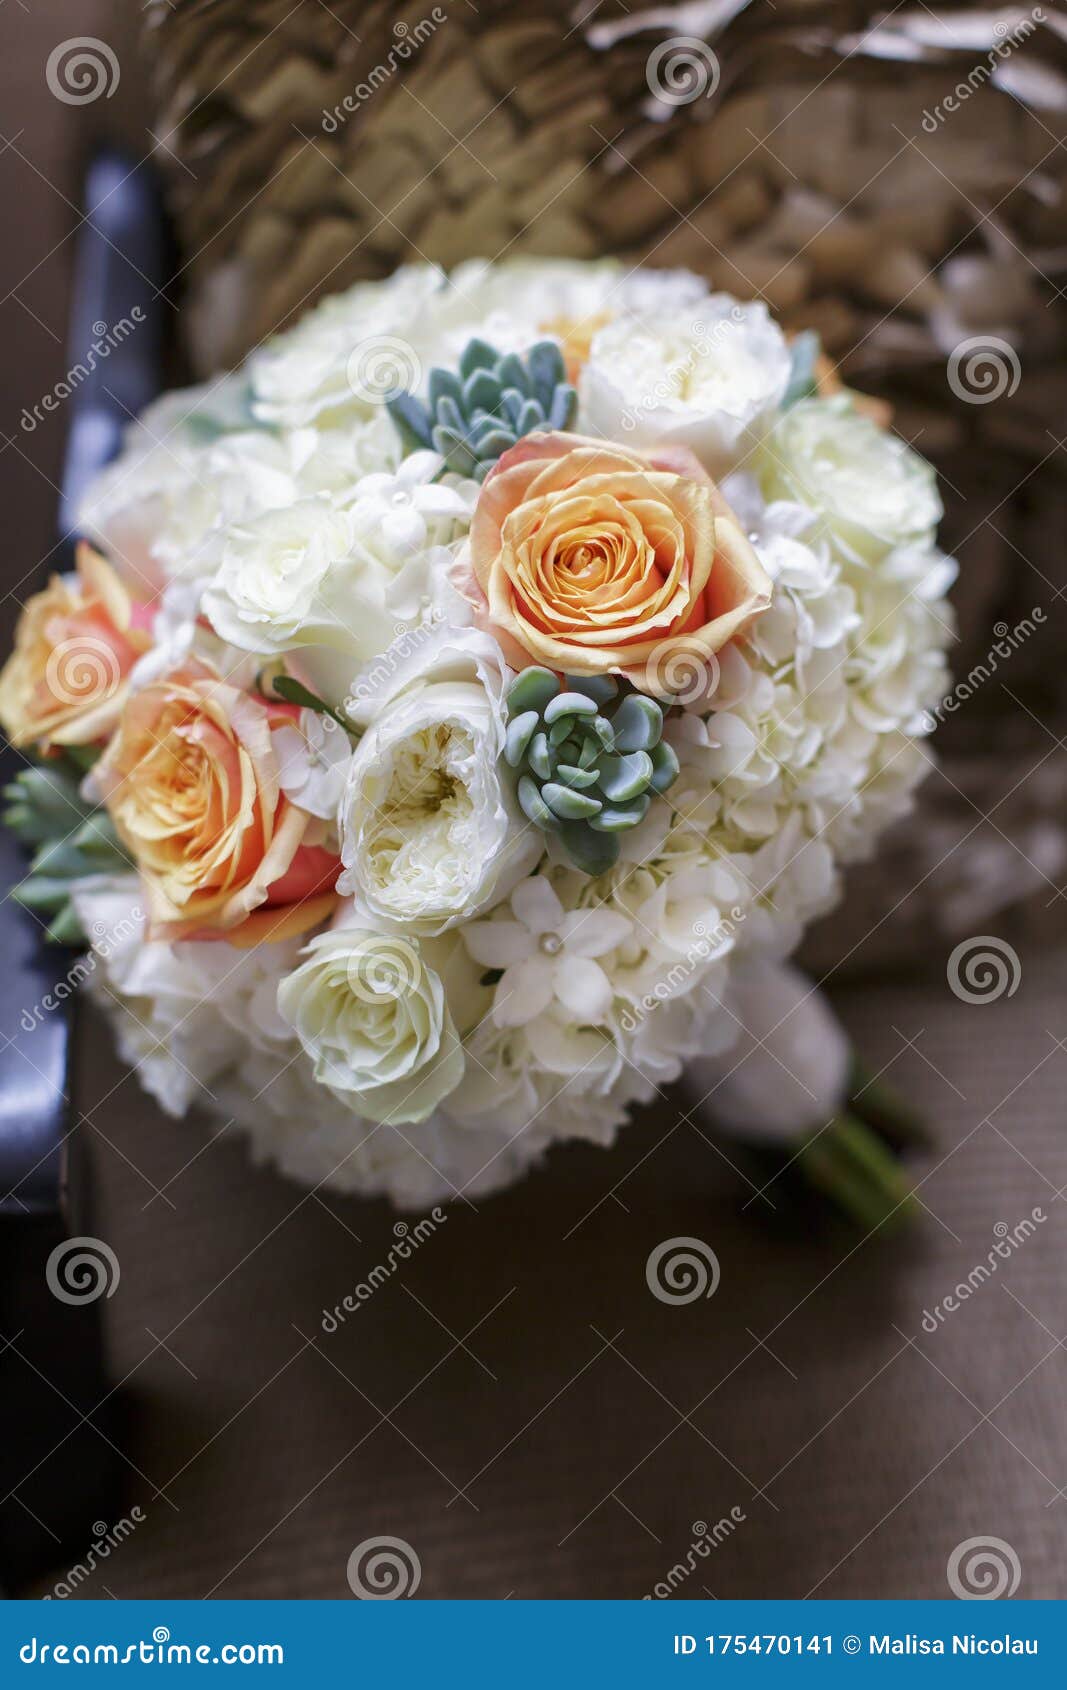 Orange and White Rose Bridal Bouquet on a Chair Stock Image - Image of  nature, flowers: 175470141